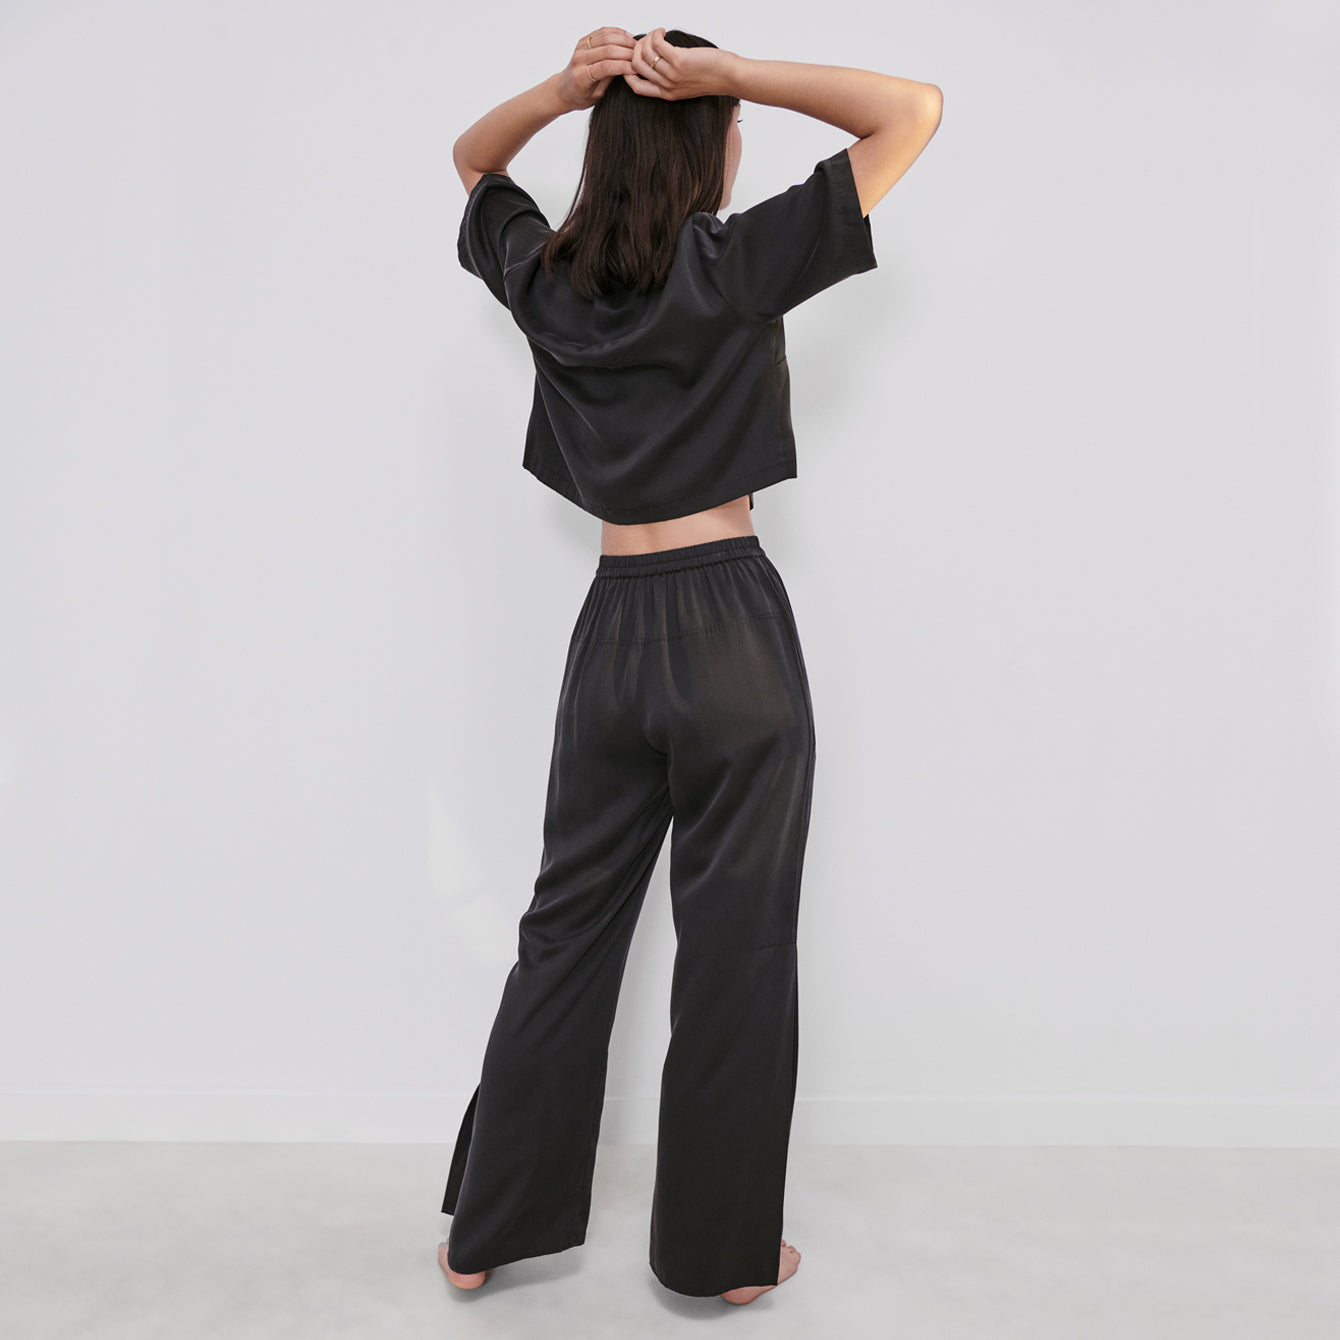 Women's long pants and strappy top set (S/M ONE SIZE) ITALIAN